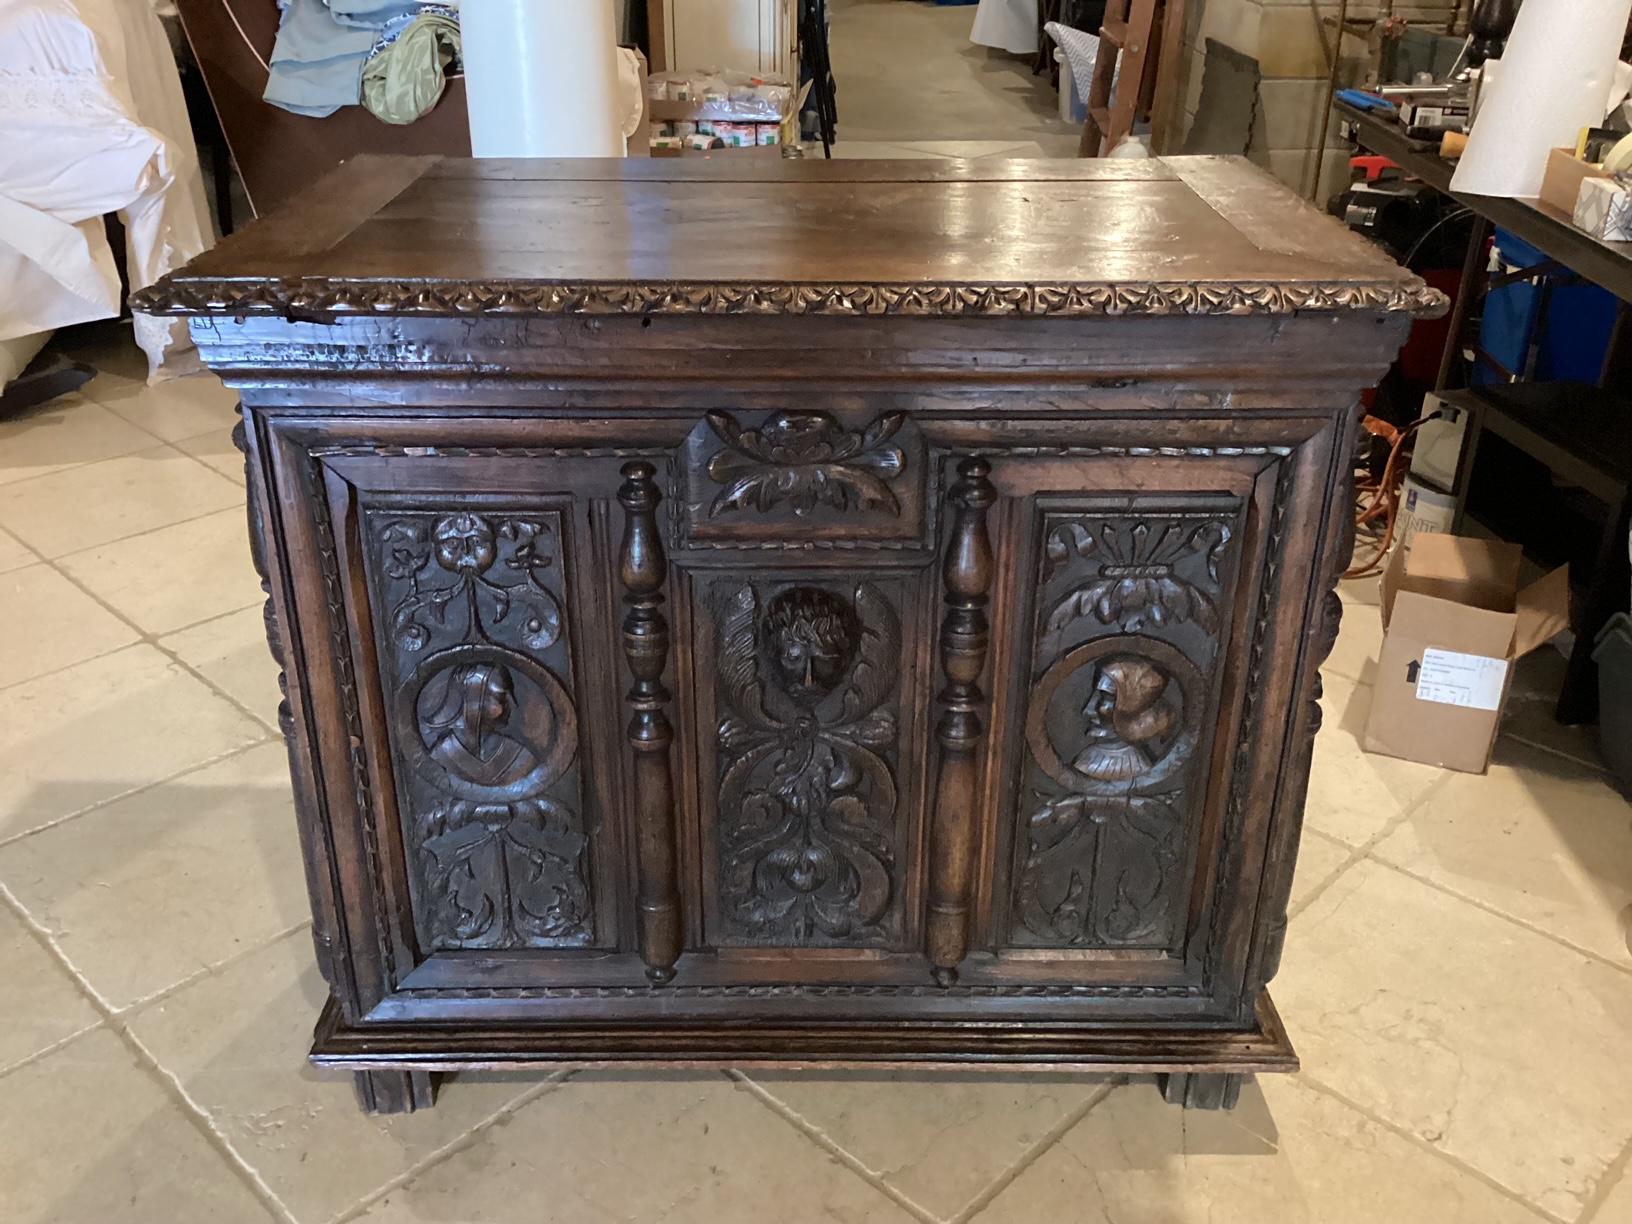 Gorgeous highly carved oak trunk featuring rich Renaissance figures with lots of floral and leaf motifs.  The top opens to reveal plenty of storage, while closed it may be used as a side table or as a seat in a mudroom or foyer. 